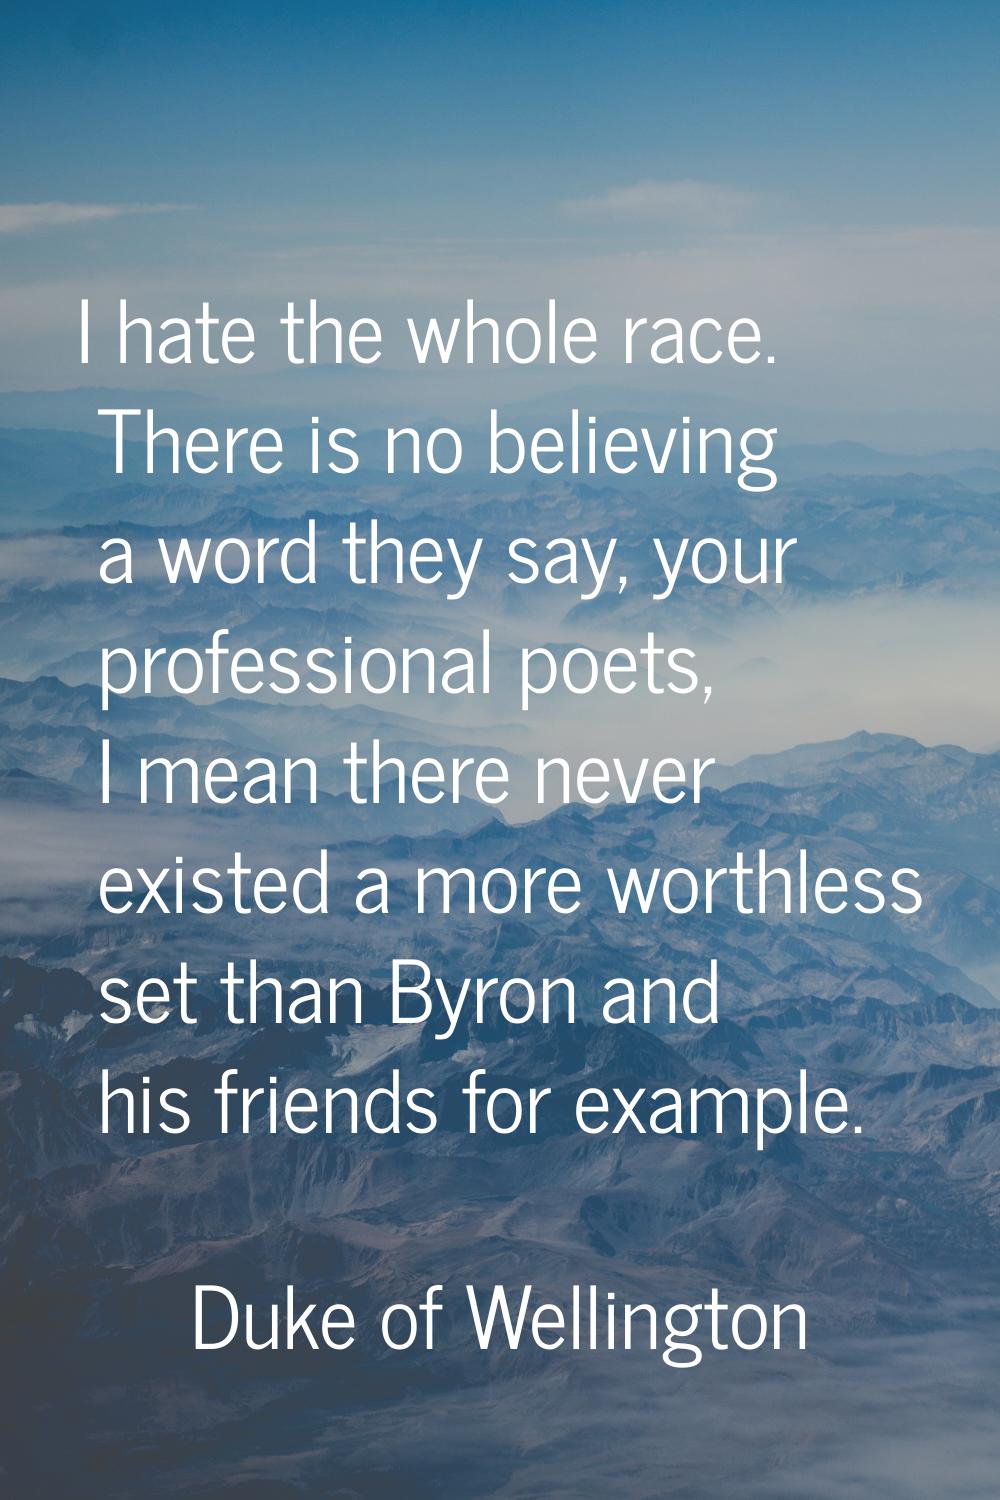 I hate the whole race. There is no believing a word they say, your professional poets, I mean there